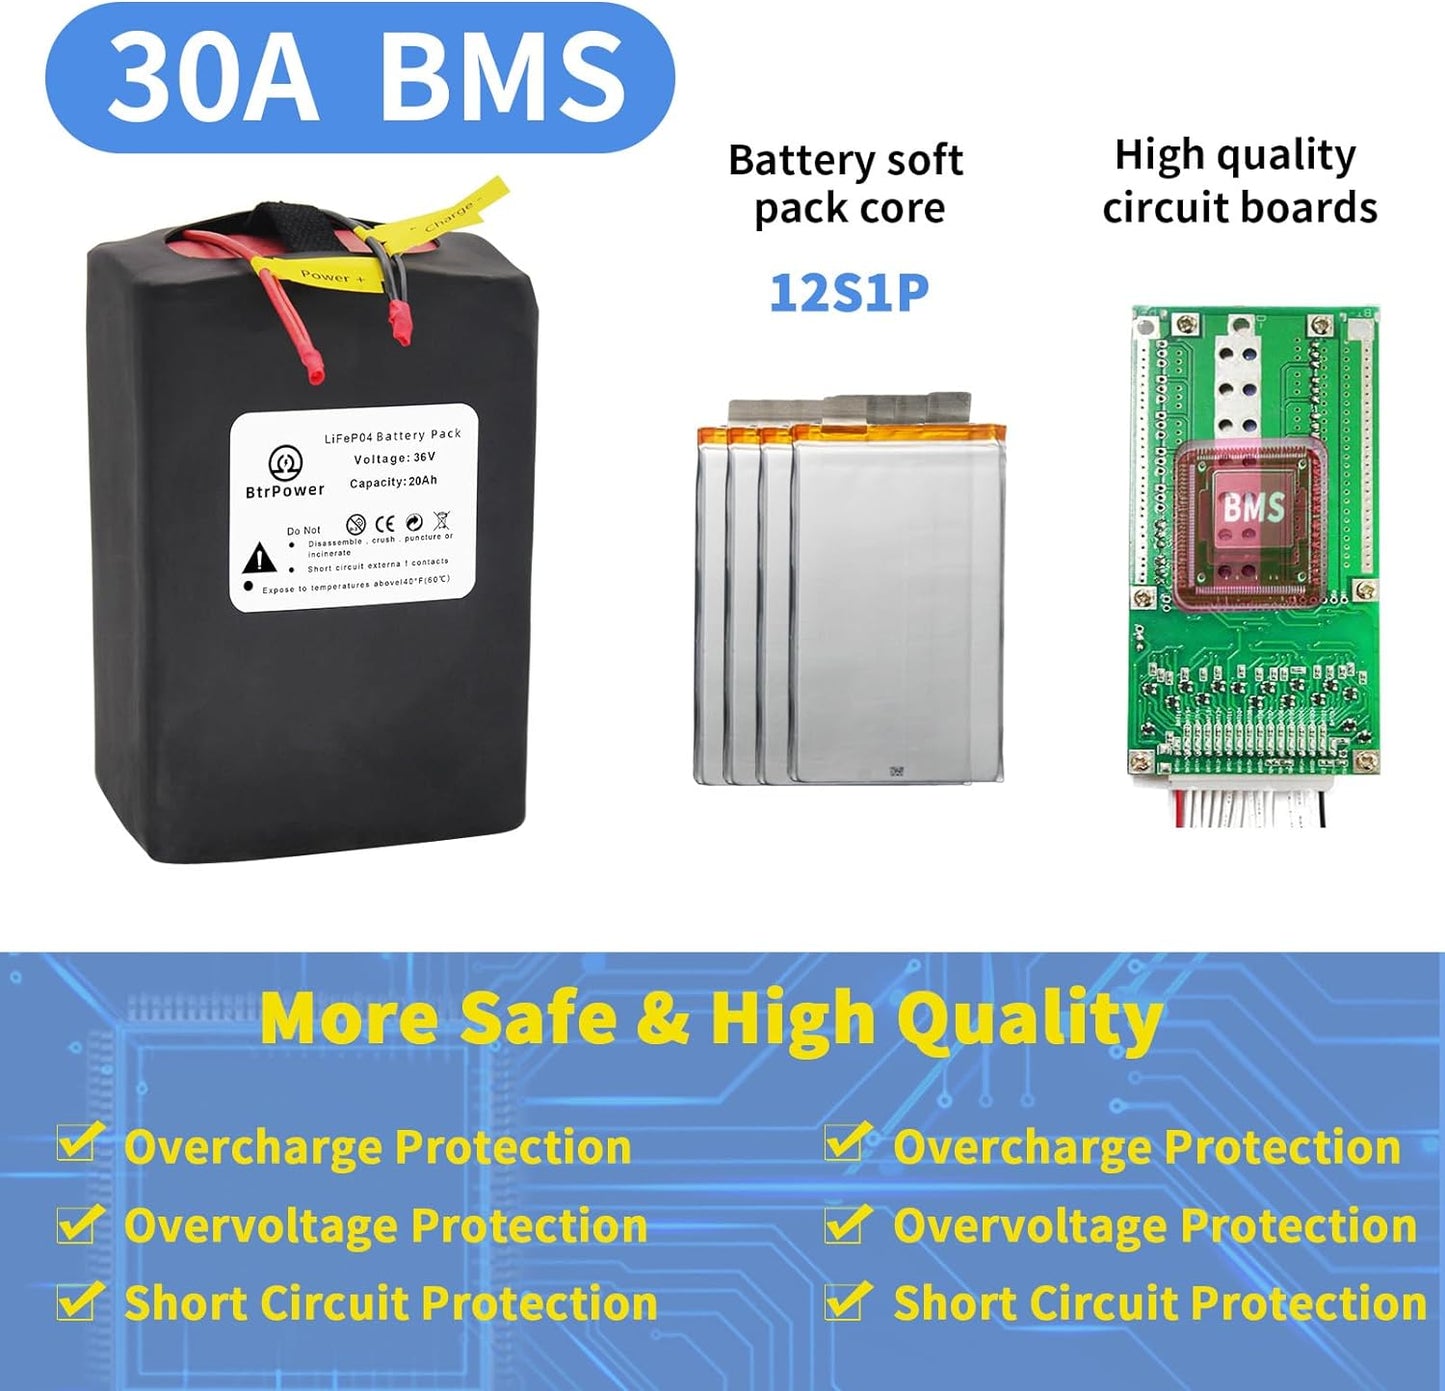 BtrPower Ebike Battery 36V 20AH LiFePo4 Battery Pack with 3A Charger, 30A BMS